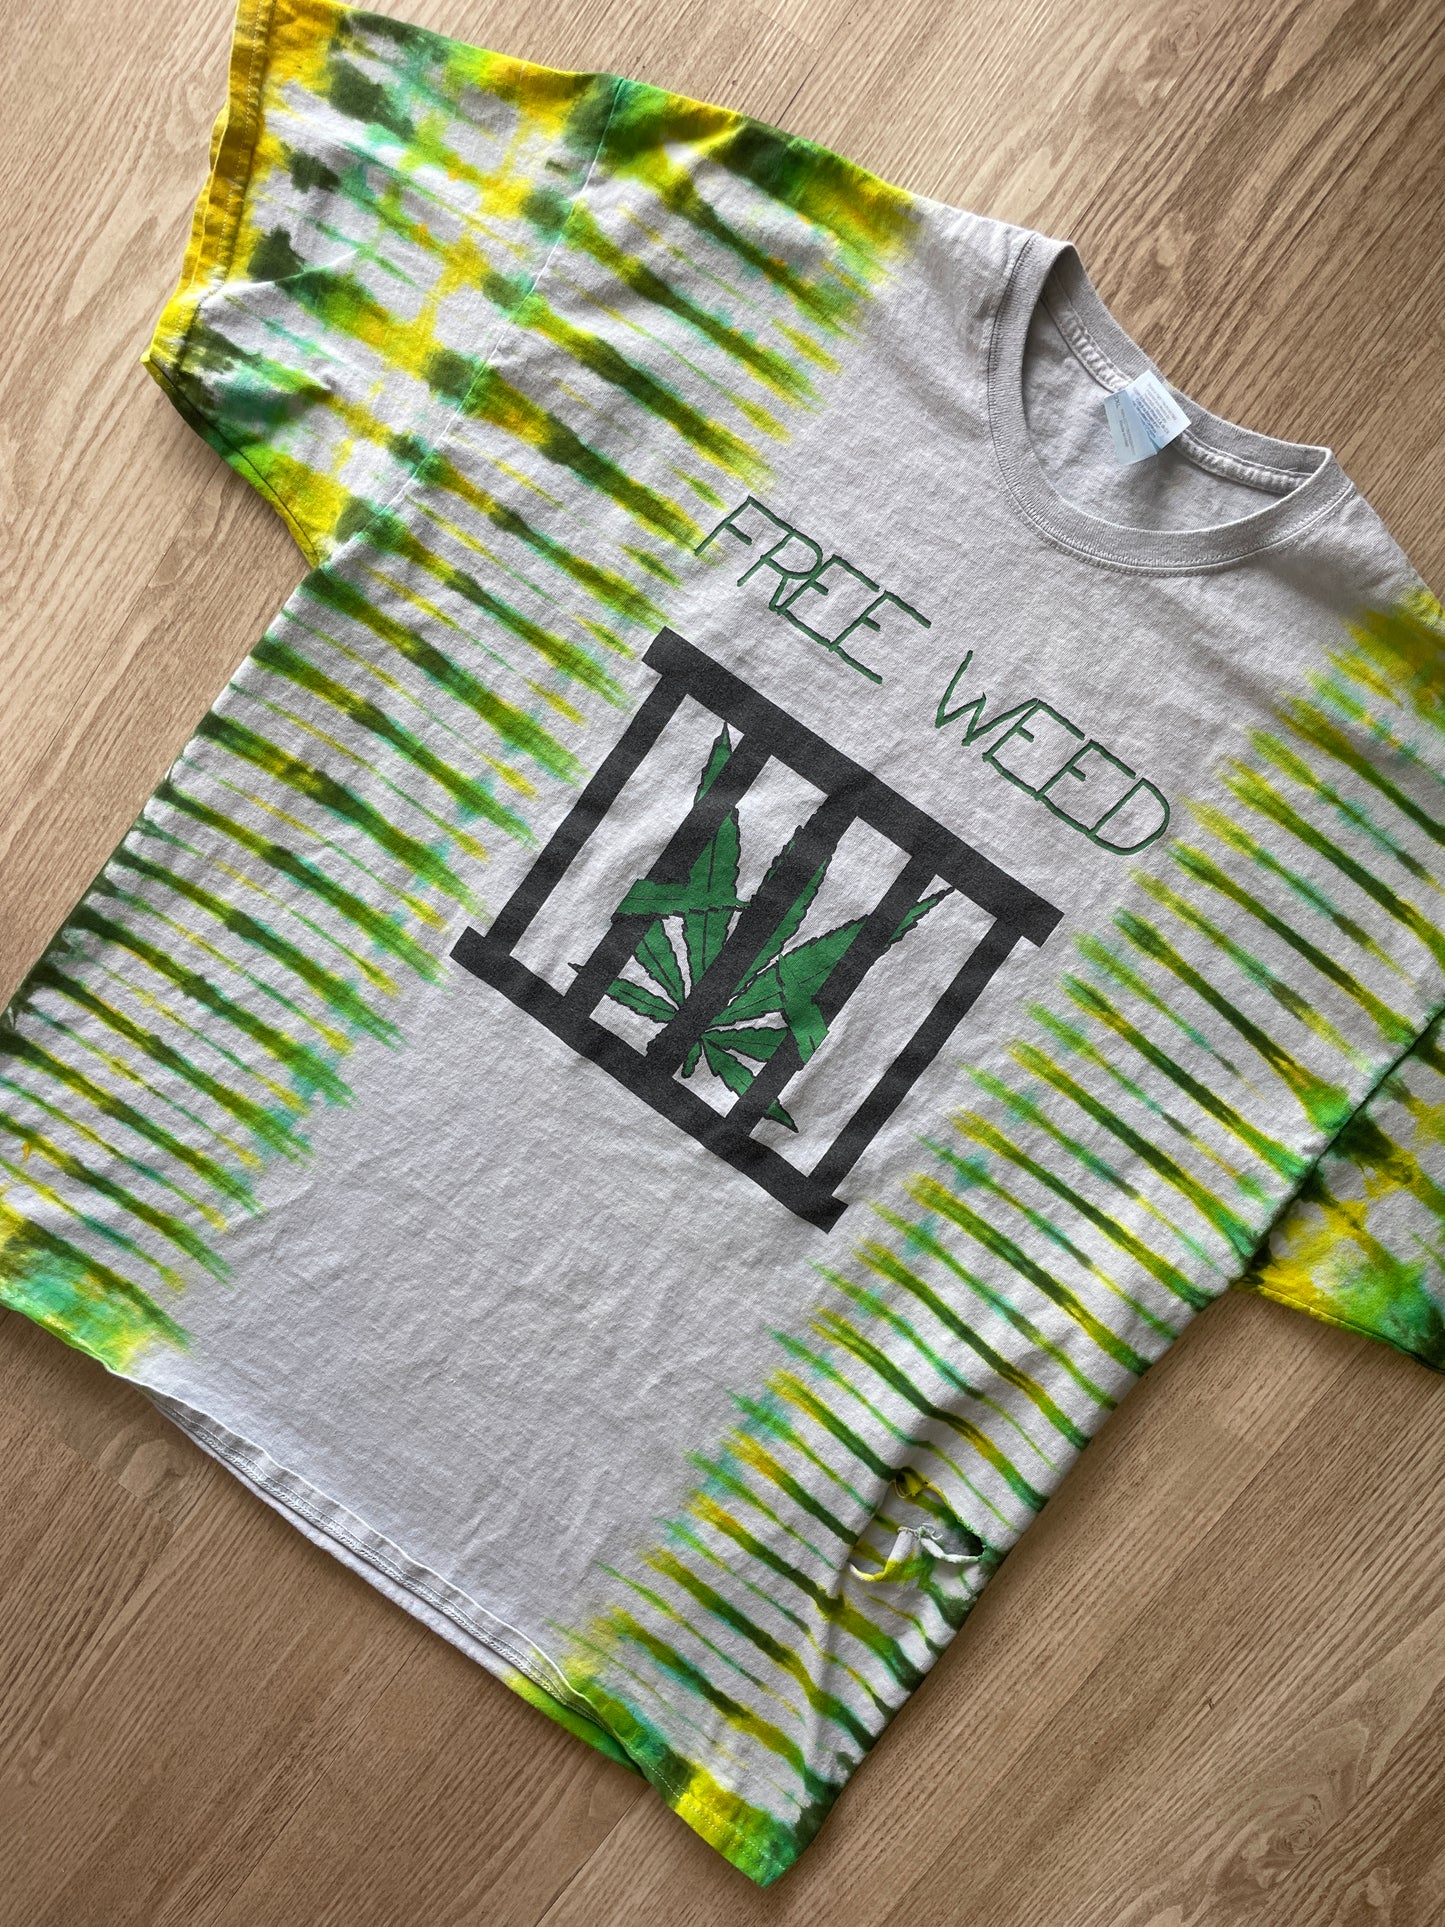 2XL Men’s Vintage Free Weed | It's Only Medicinal Double-Sided Handmade Tie Dye T-Shirt | One-Of-a-Kind White and Green Vintage Short Sleeve Shirt